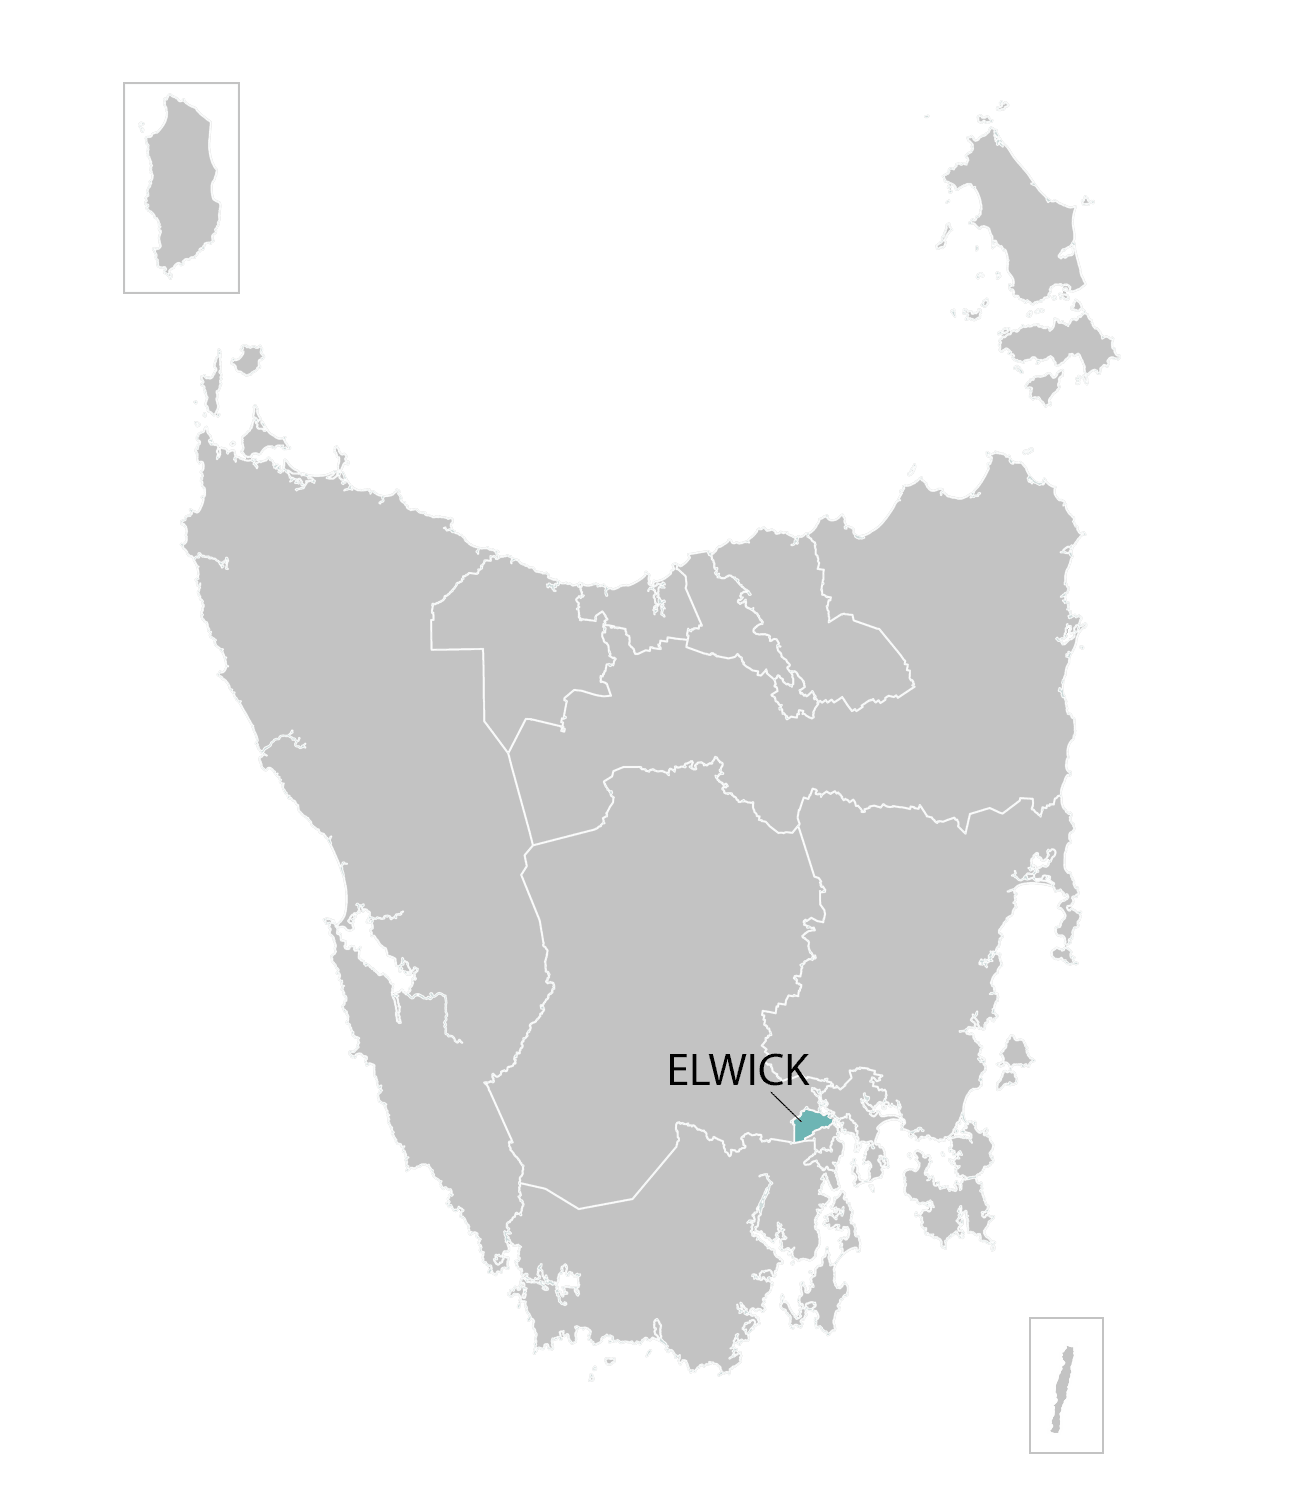 Elwick division highlighted on illustrated map of Tasmania